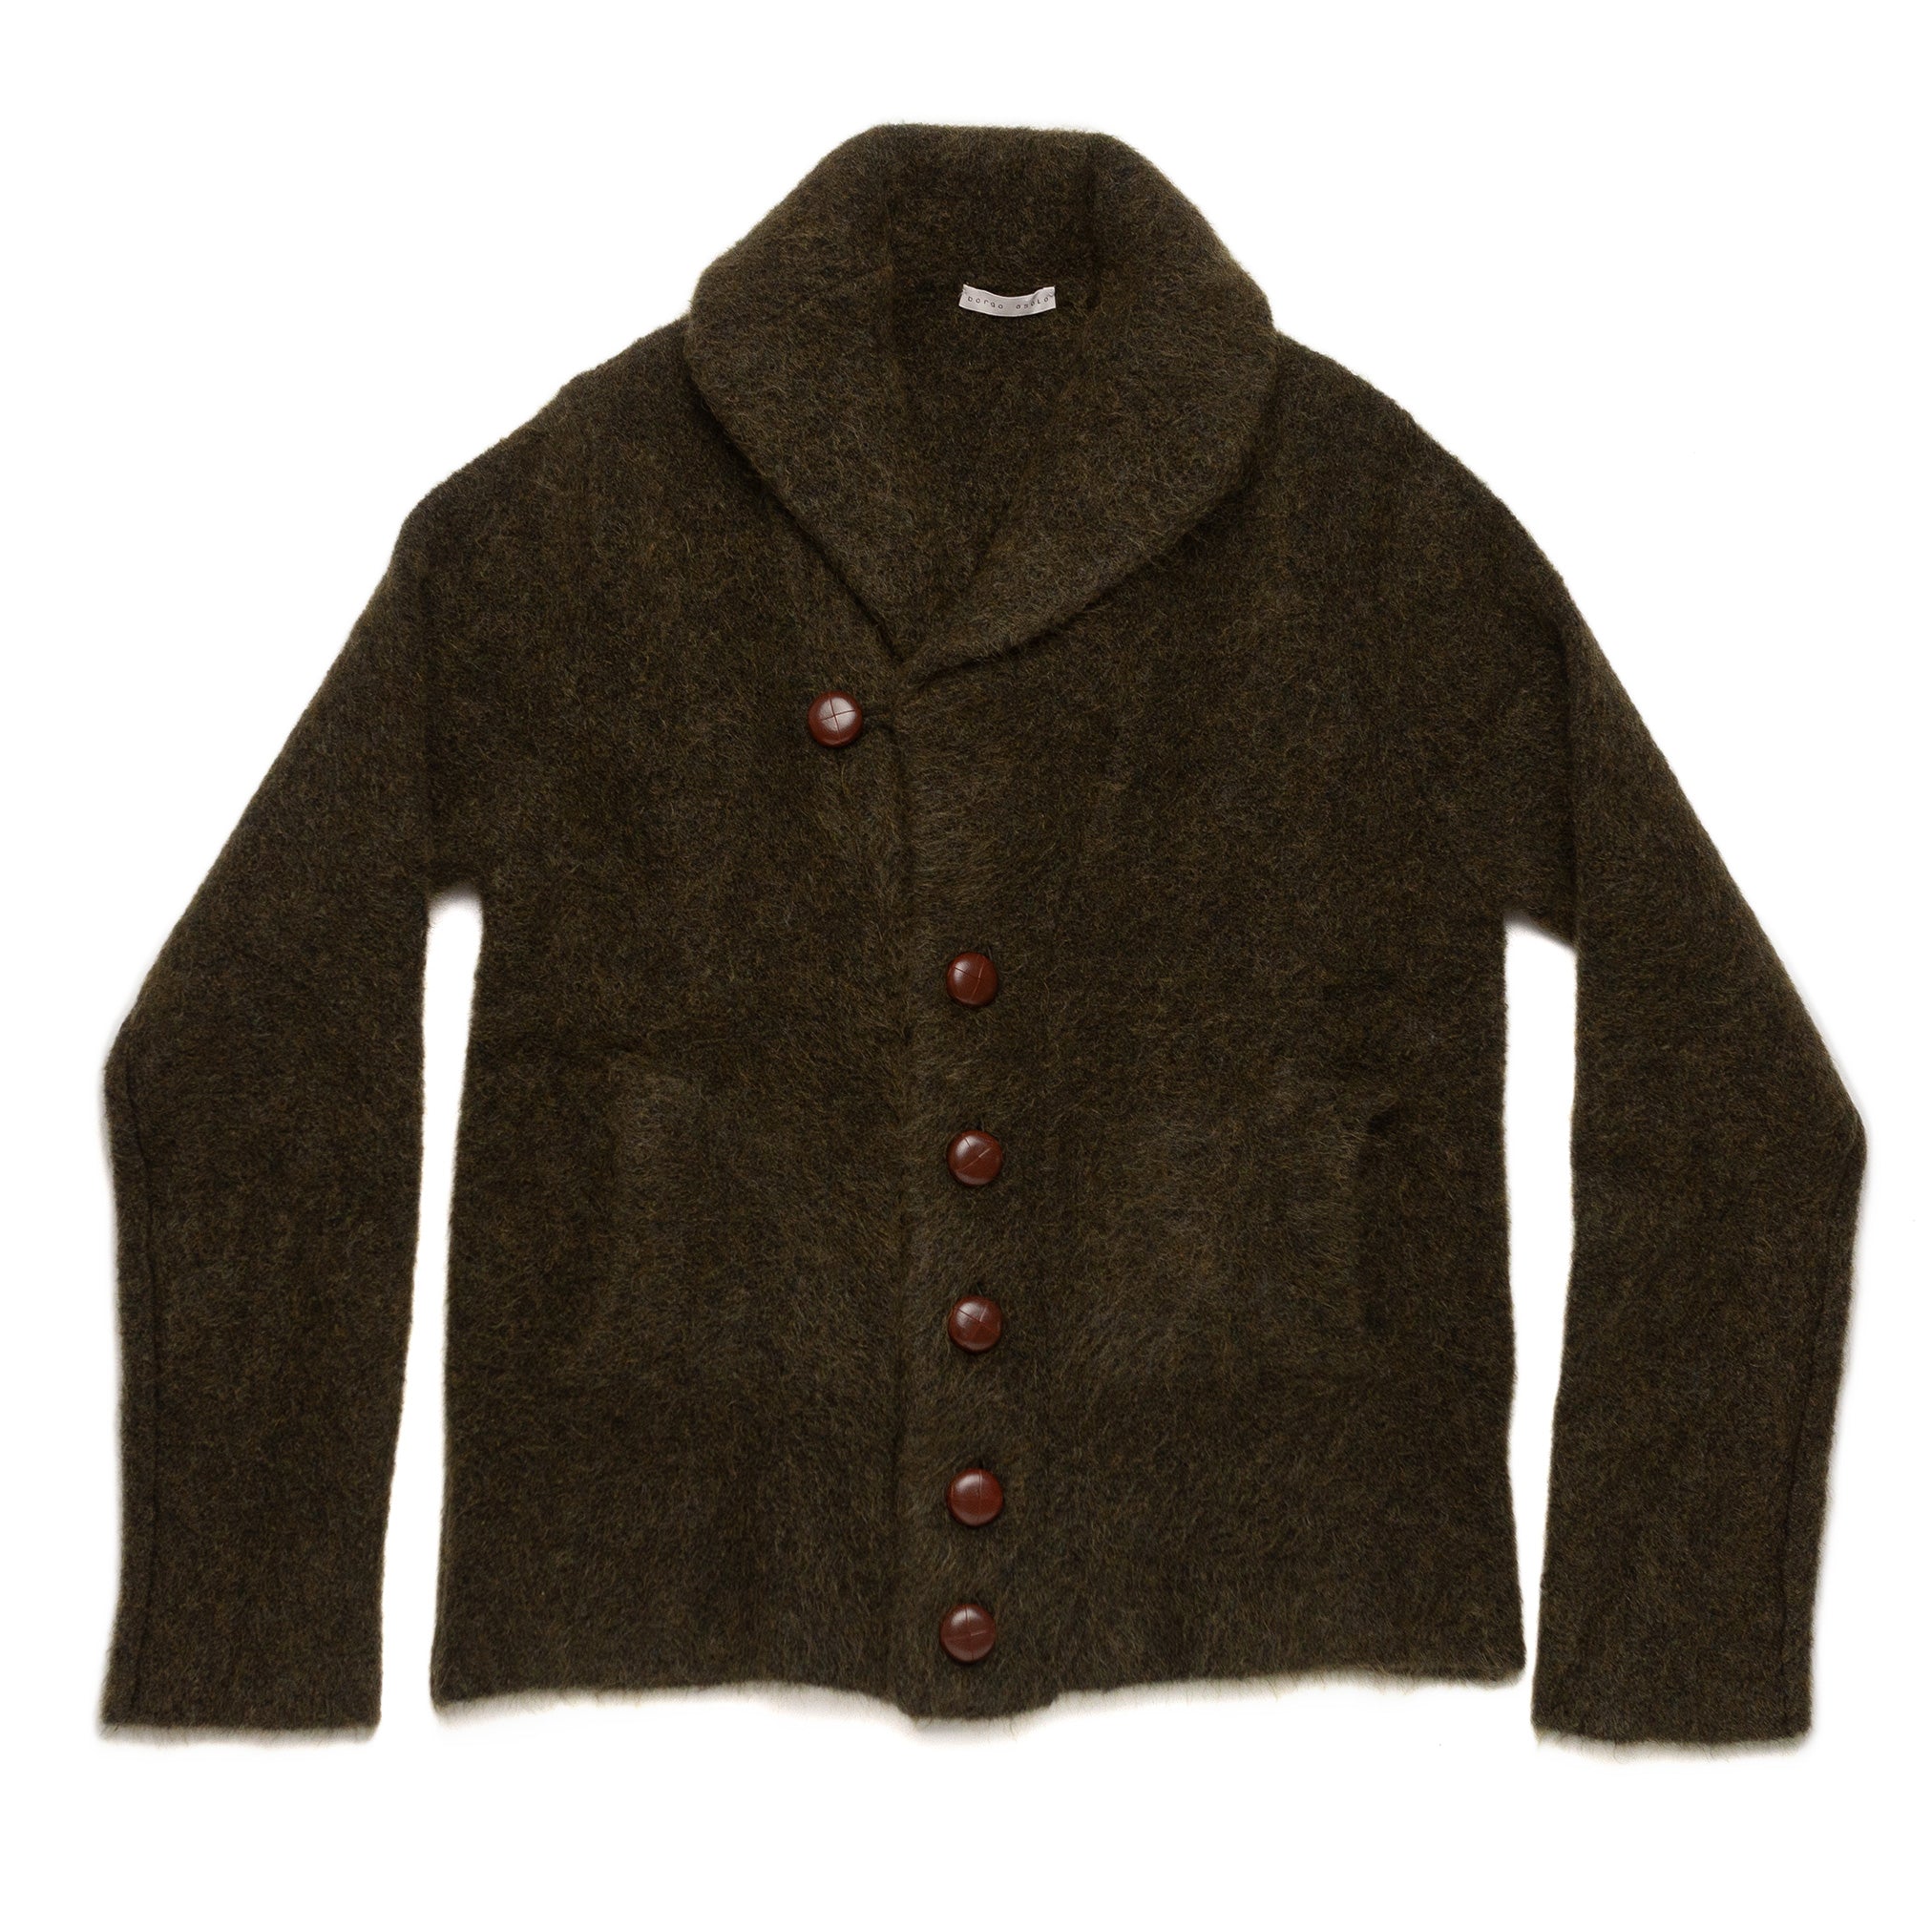 Mohair Jacket in Olive